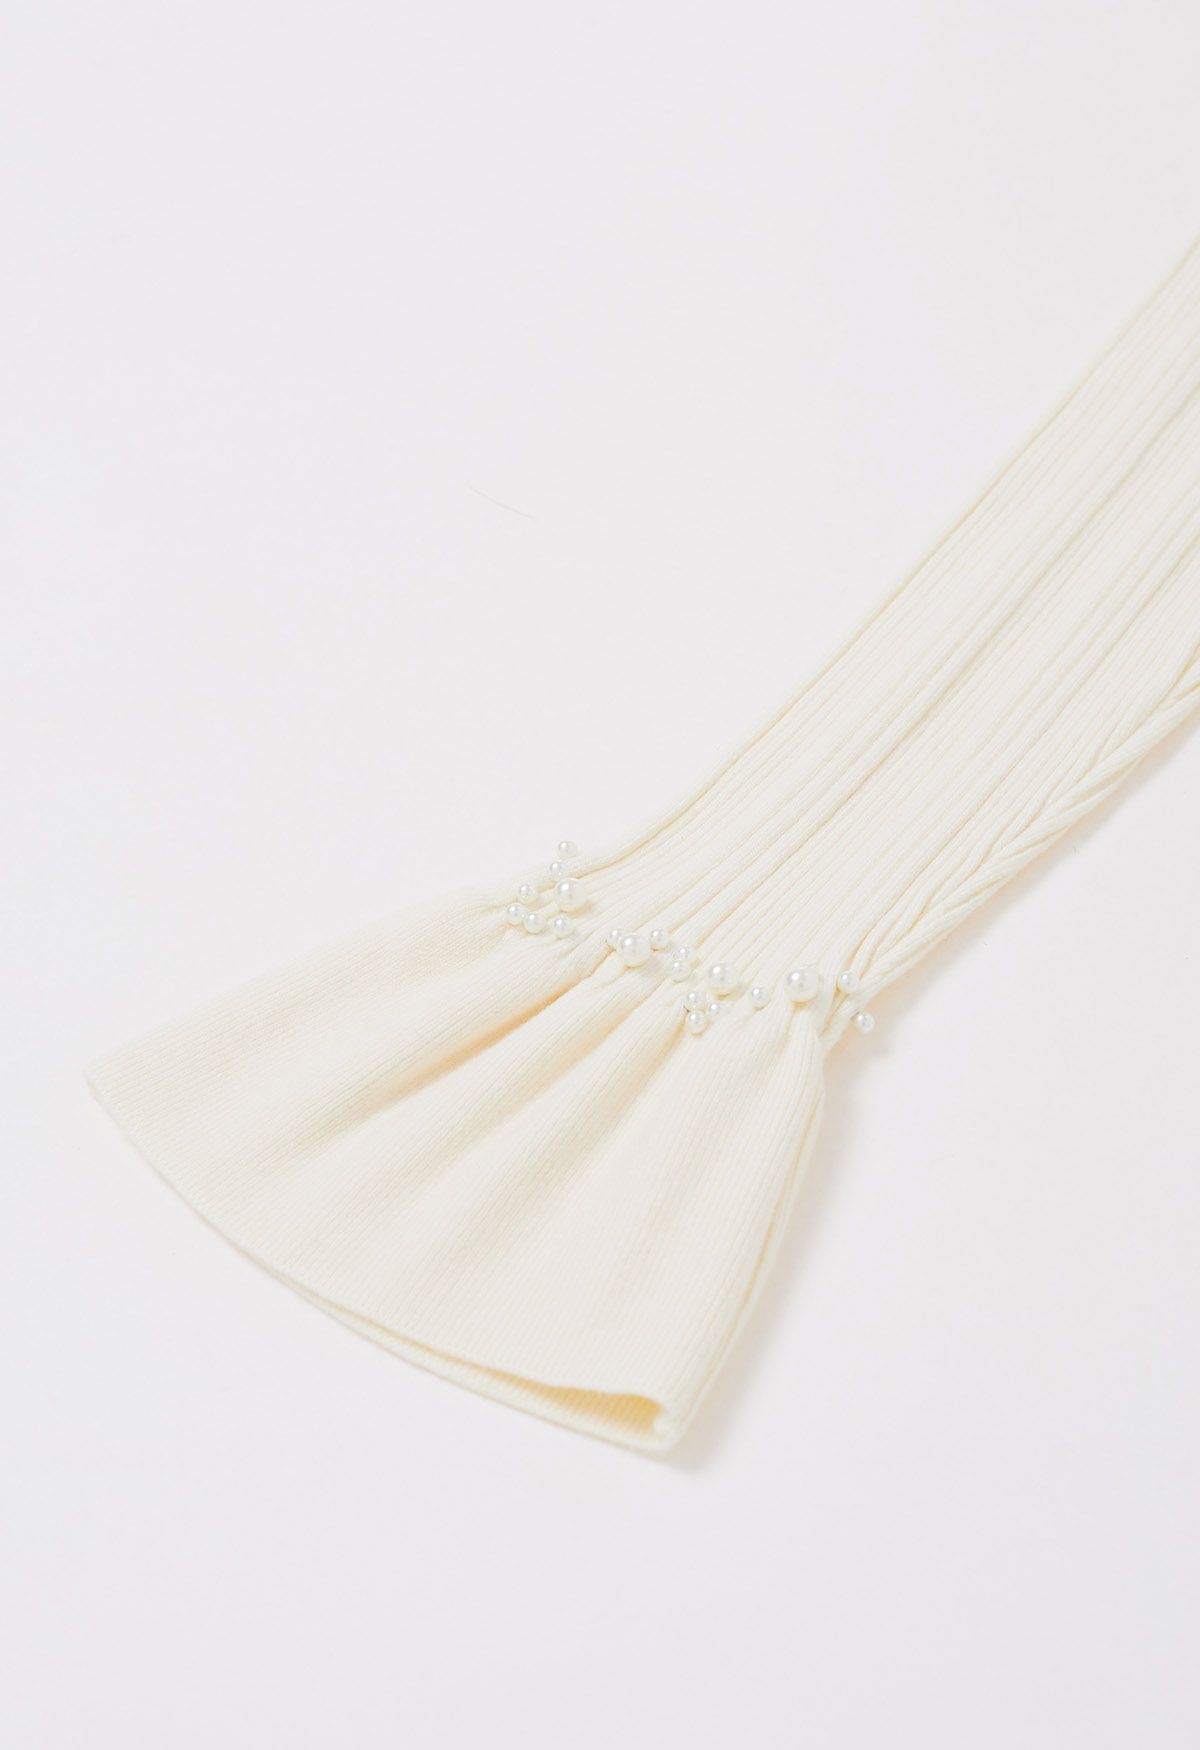 Pearl Adorned Flare Cuffs Ribbed Knit Top in Cream